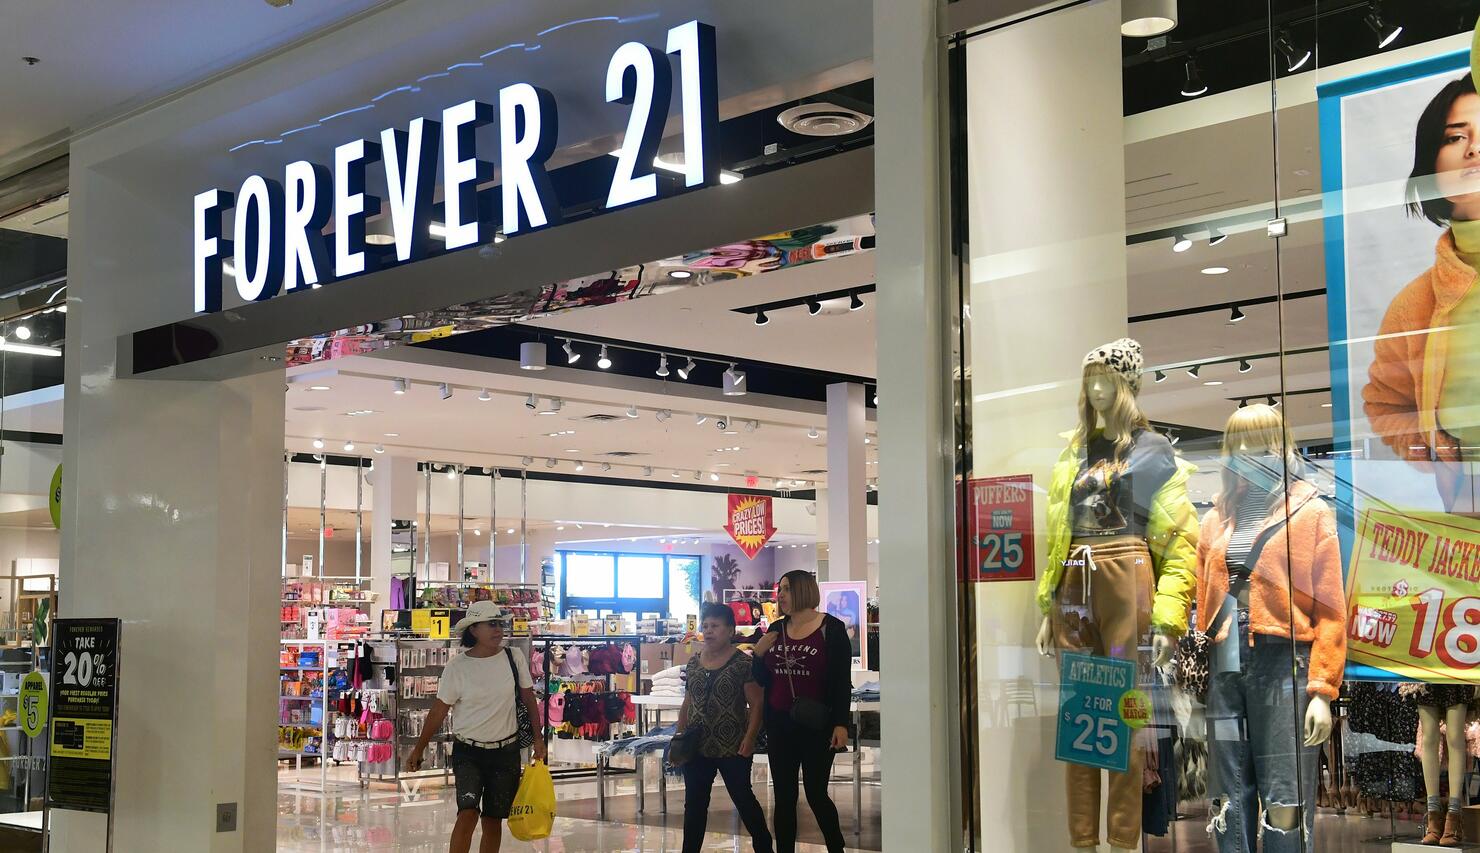 Authentic Brands Group Inks Deal With Shein for Forever 21